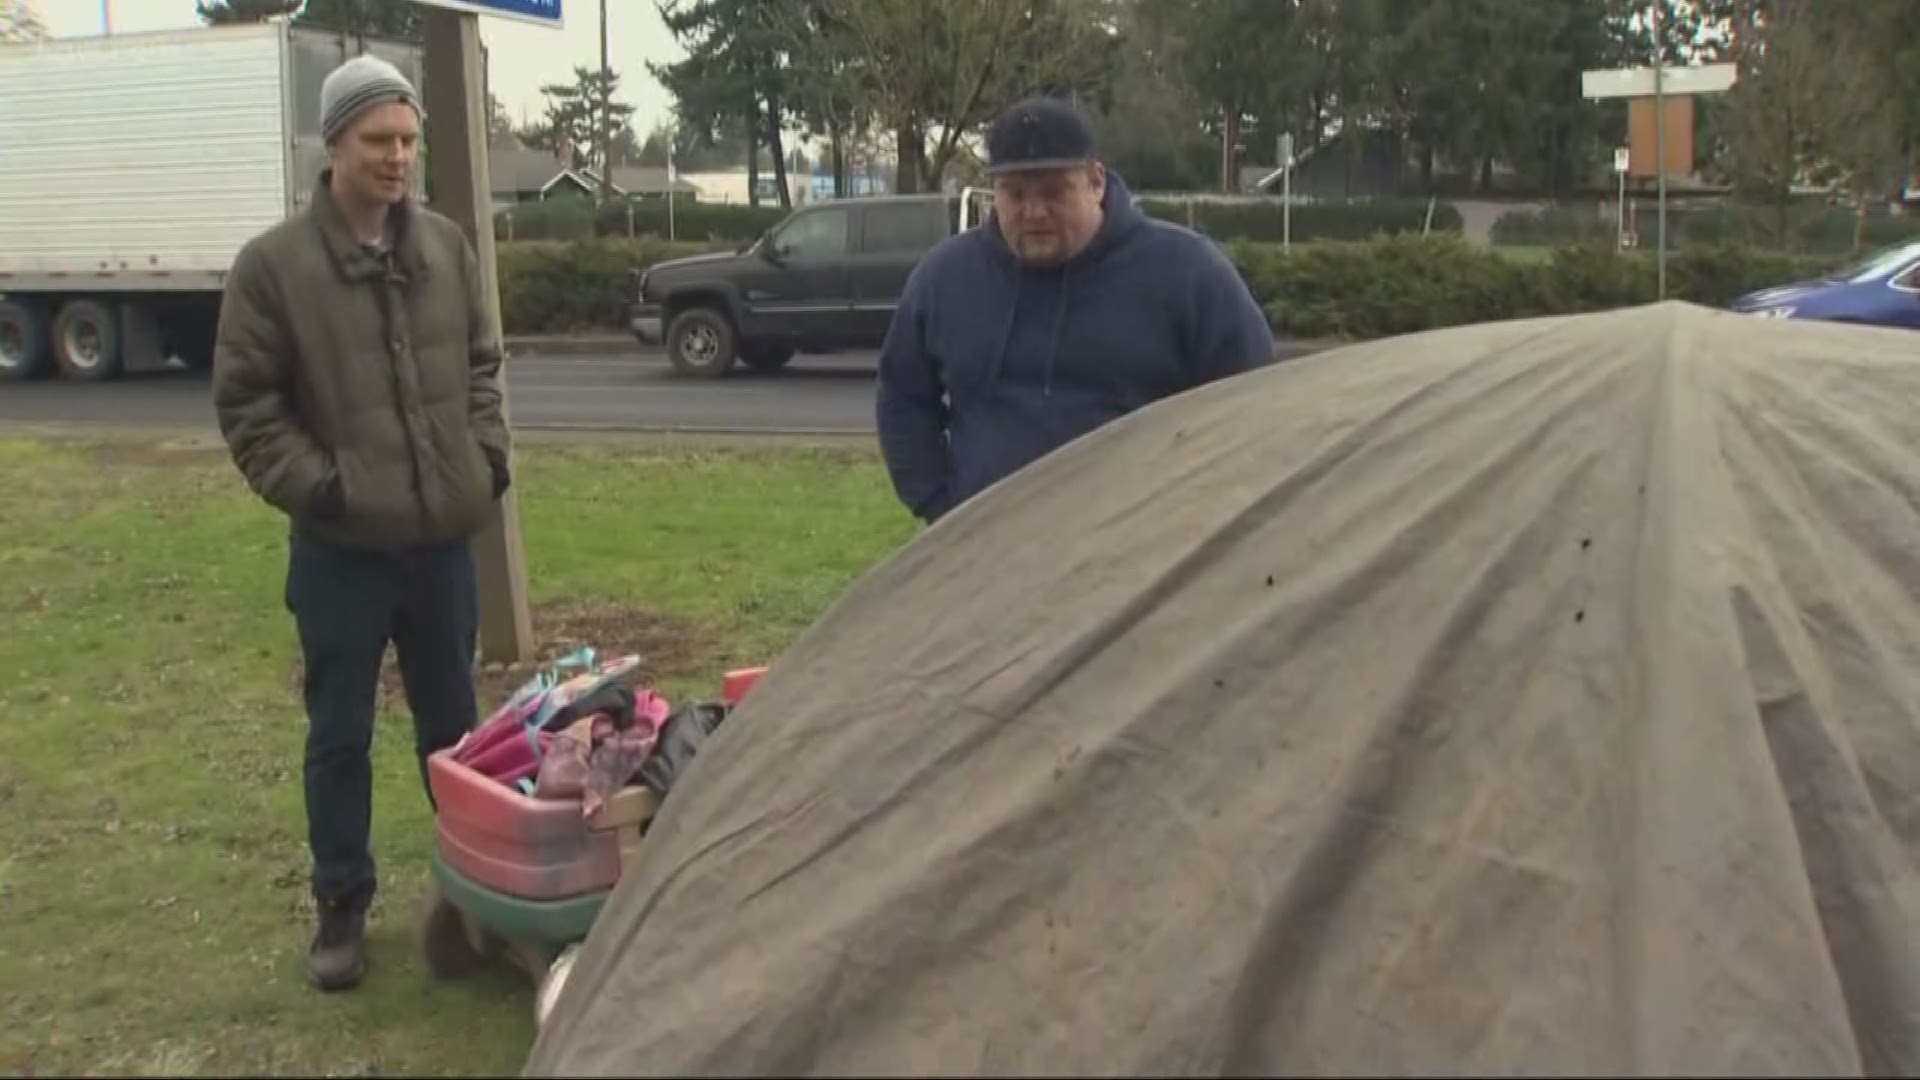 Volunteers want people to think about the homeless during severe winter weather.